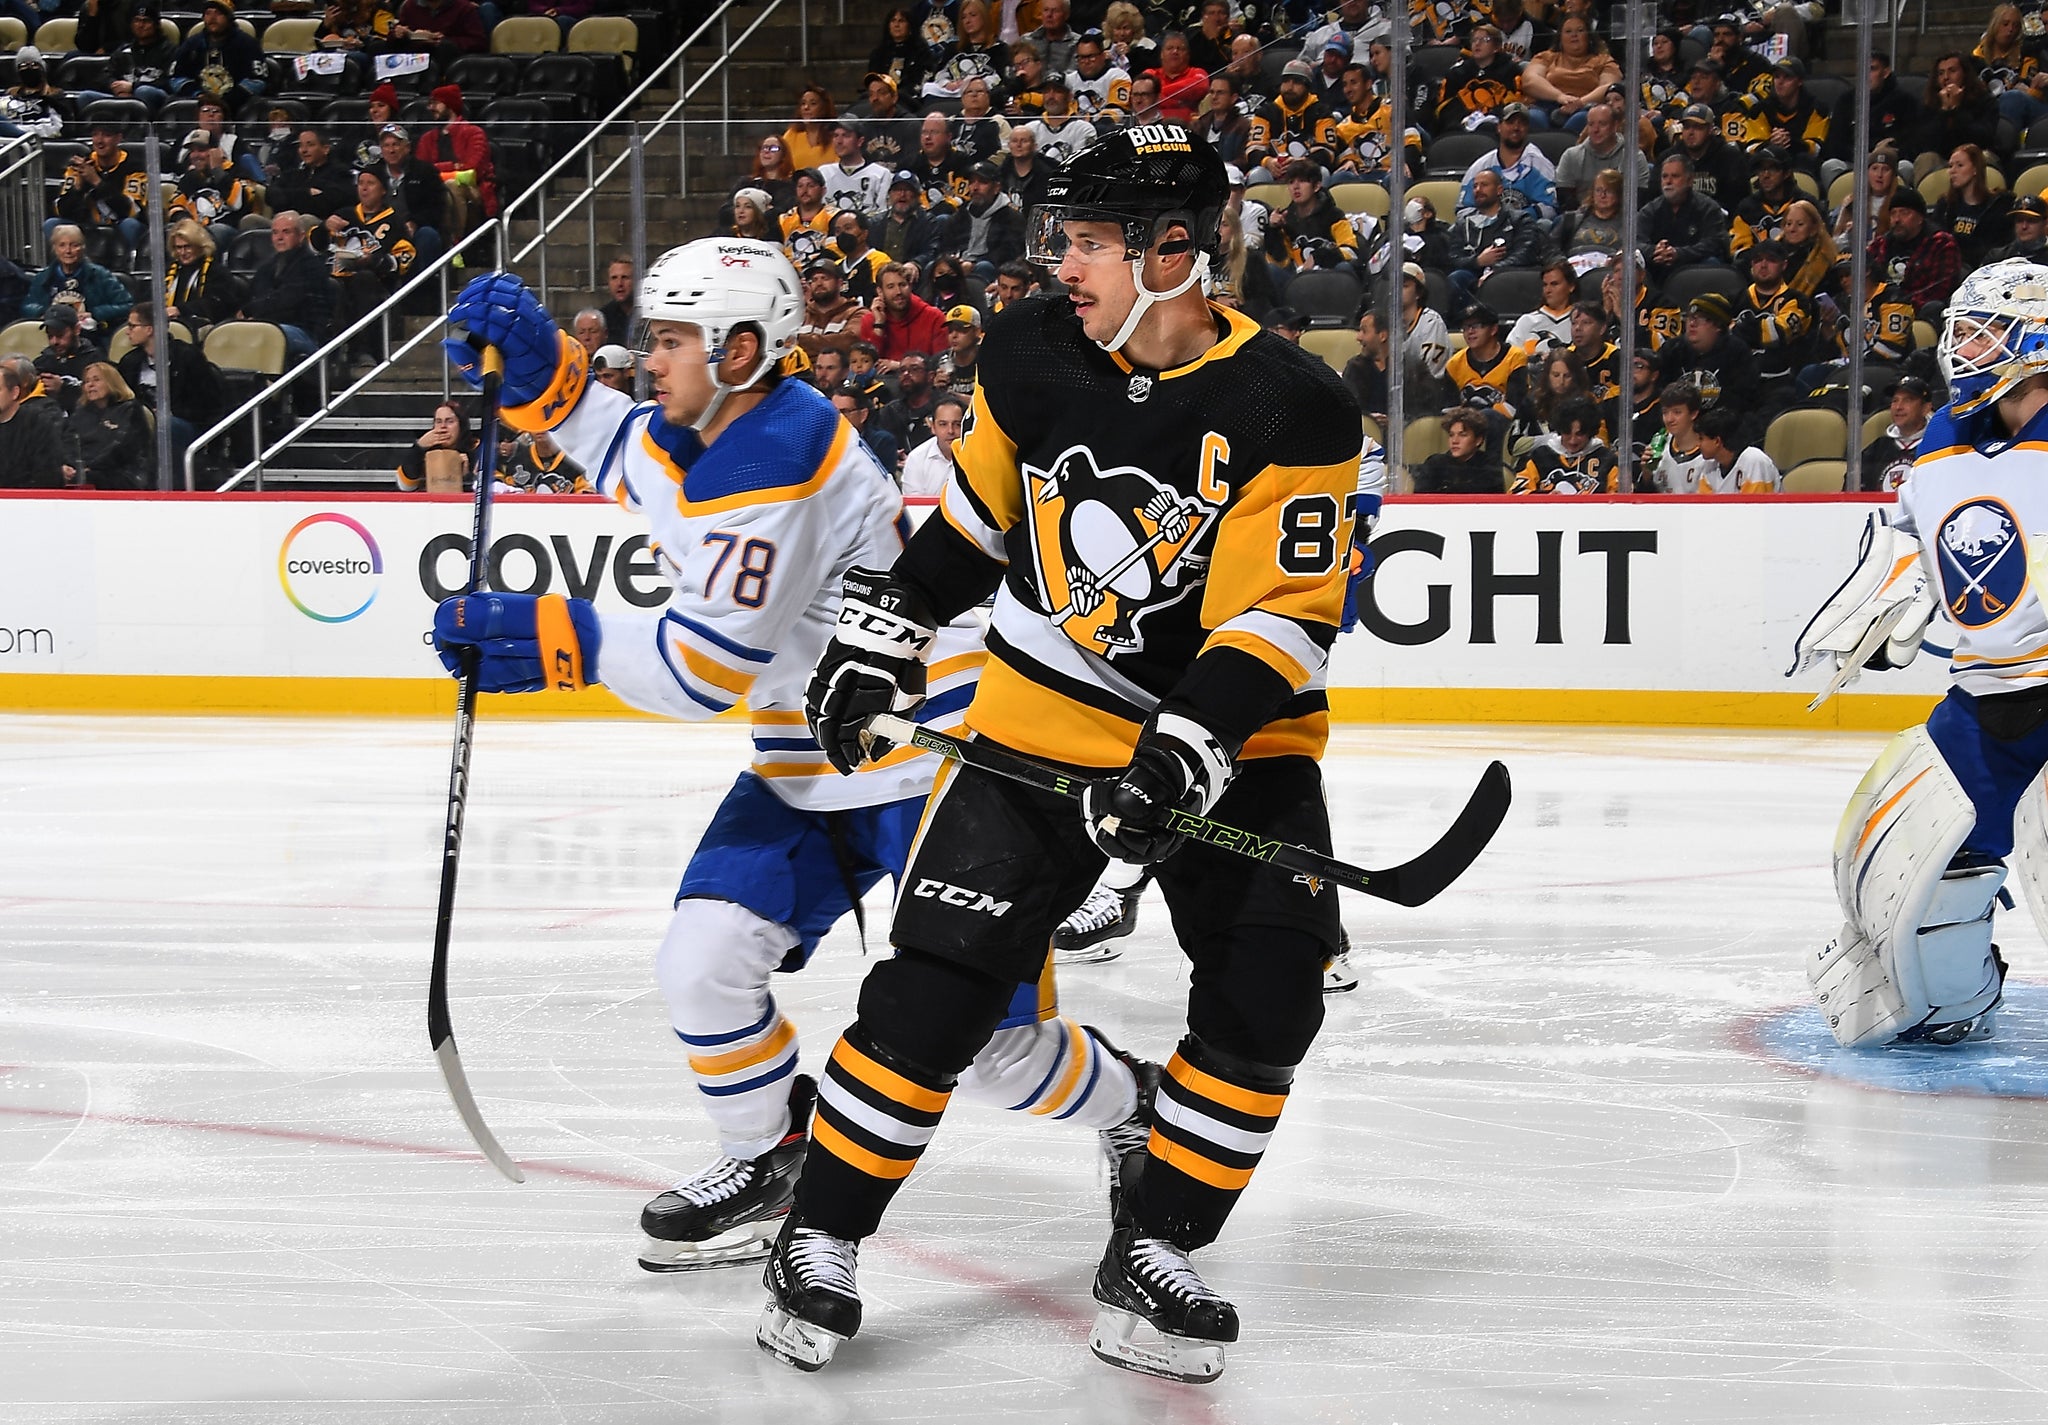 Pittsburgh Penguins Sidney Crosby skates against the Buffalo